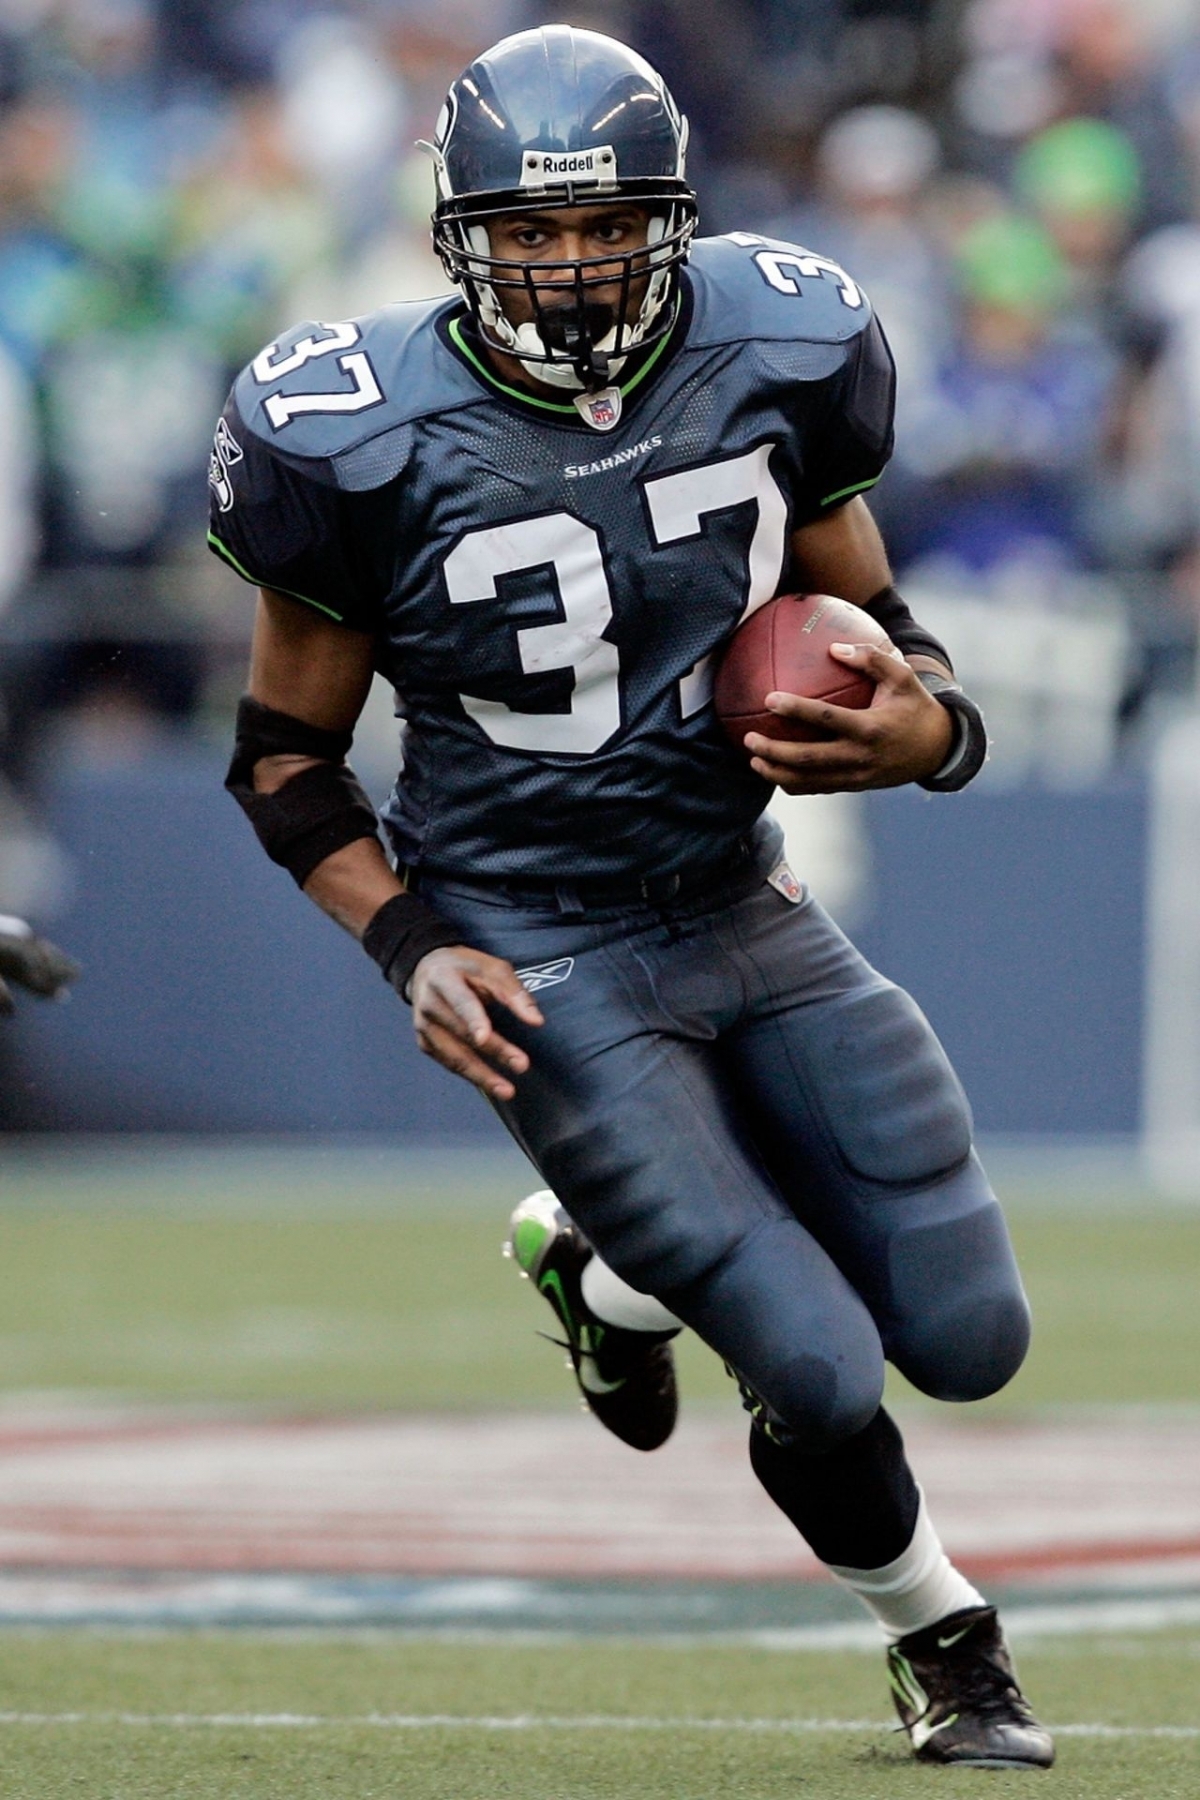 Not in Hall of Fame - 79. Shaun Alexander